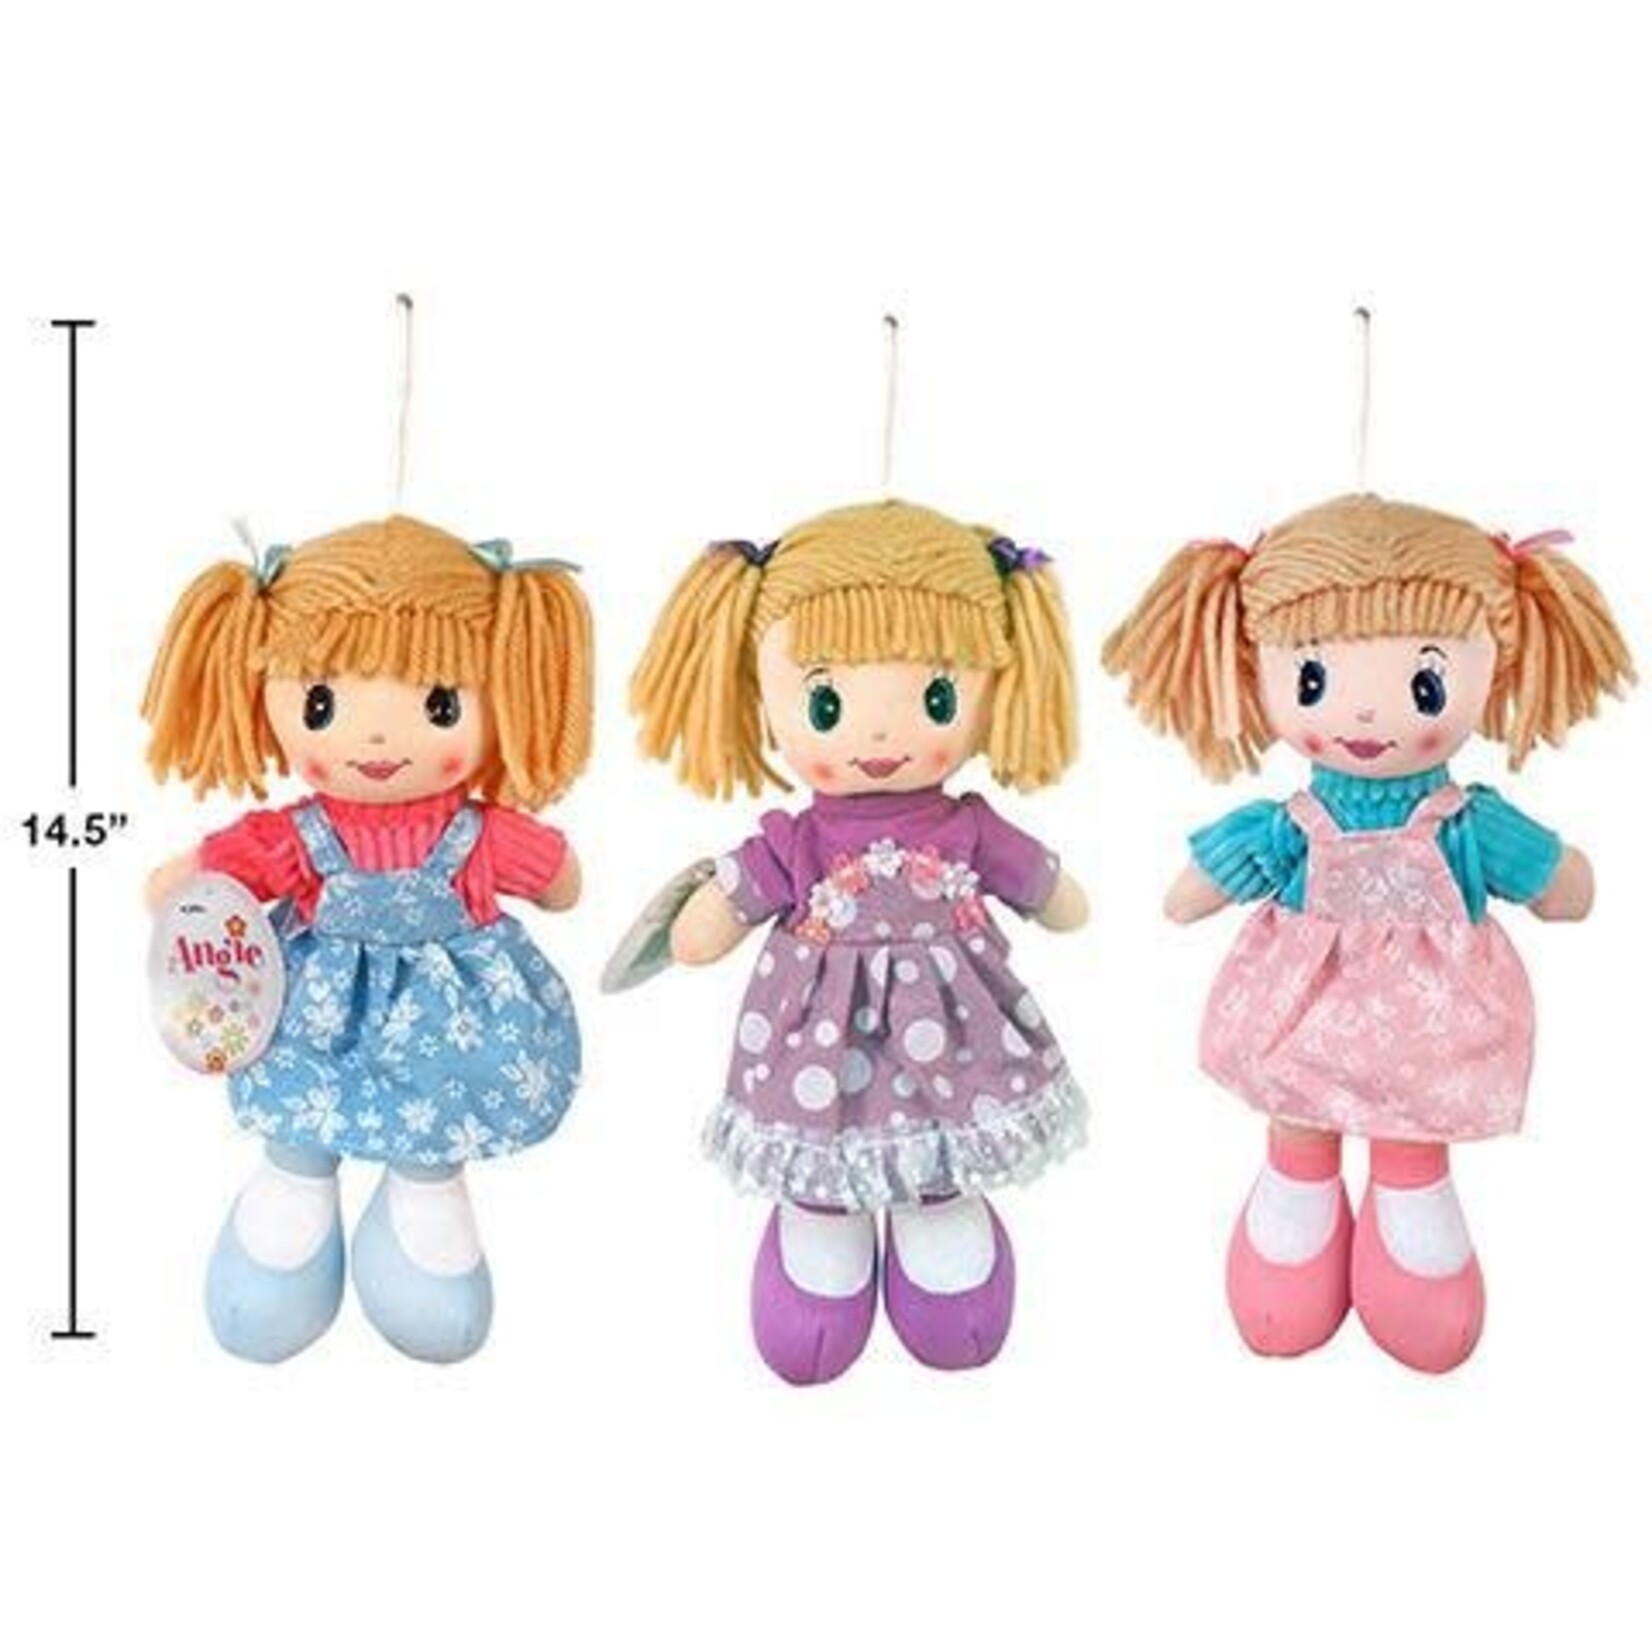 ANGIE DOLL 10" SMALL